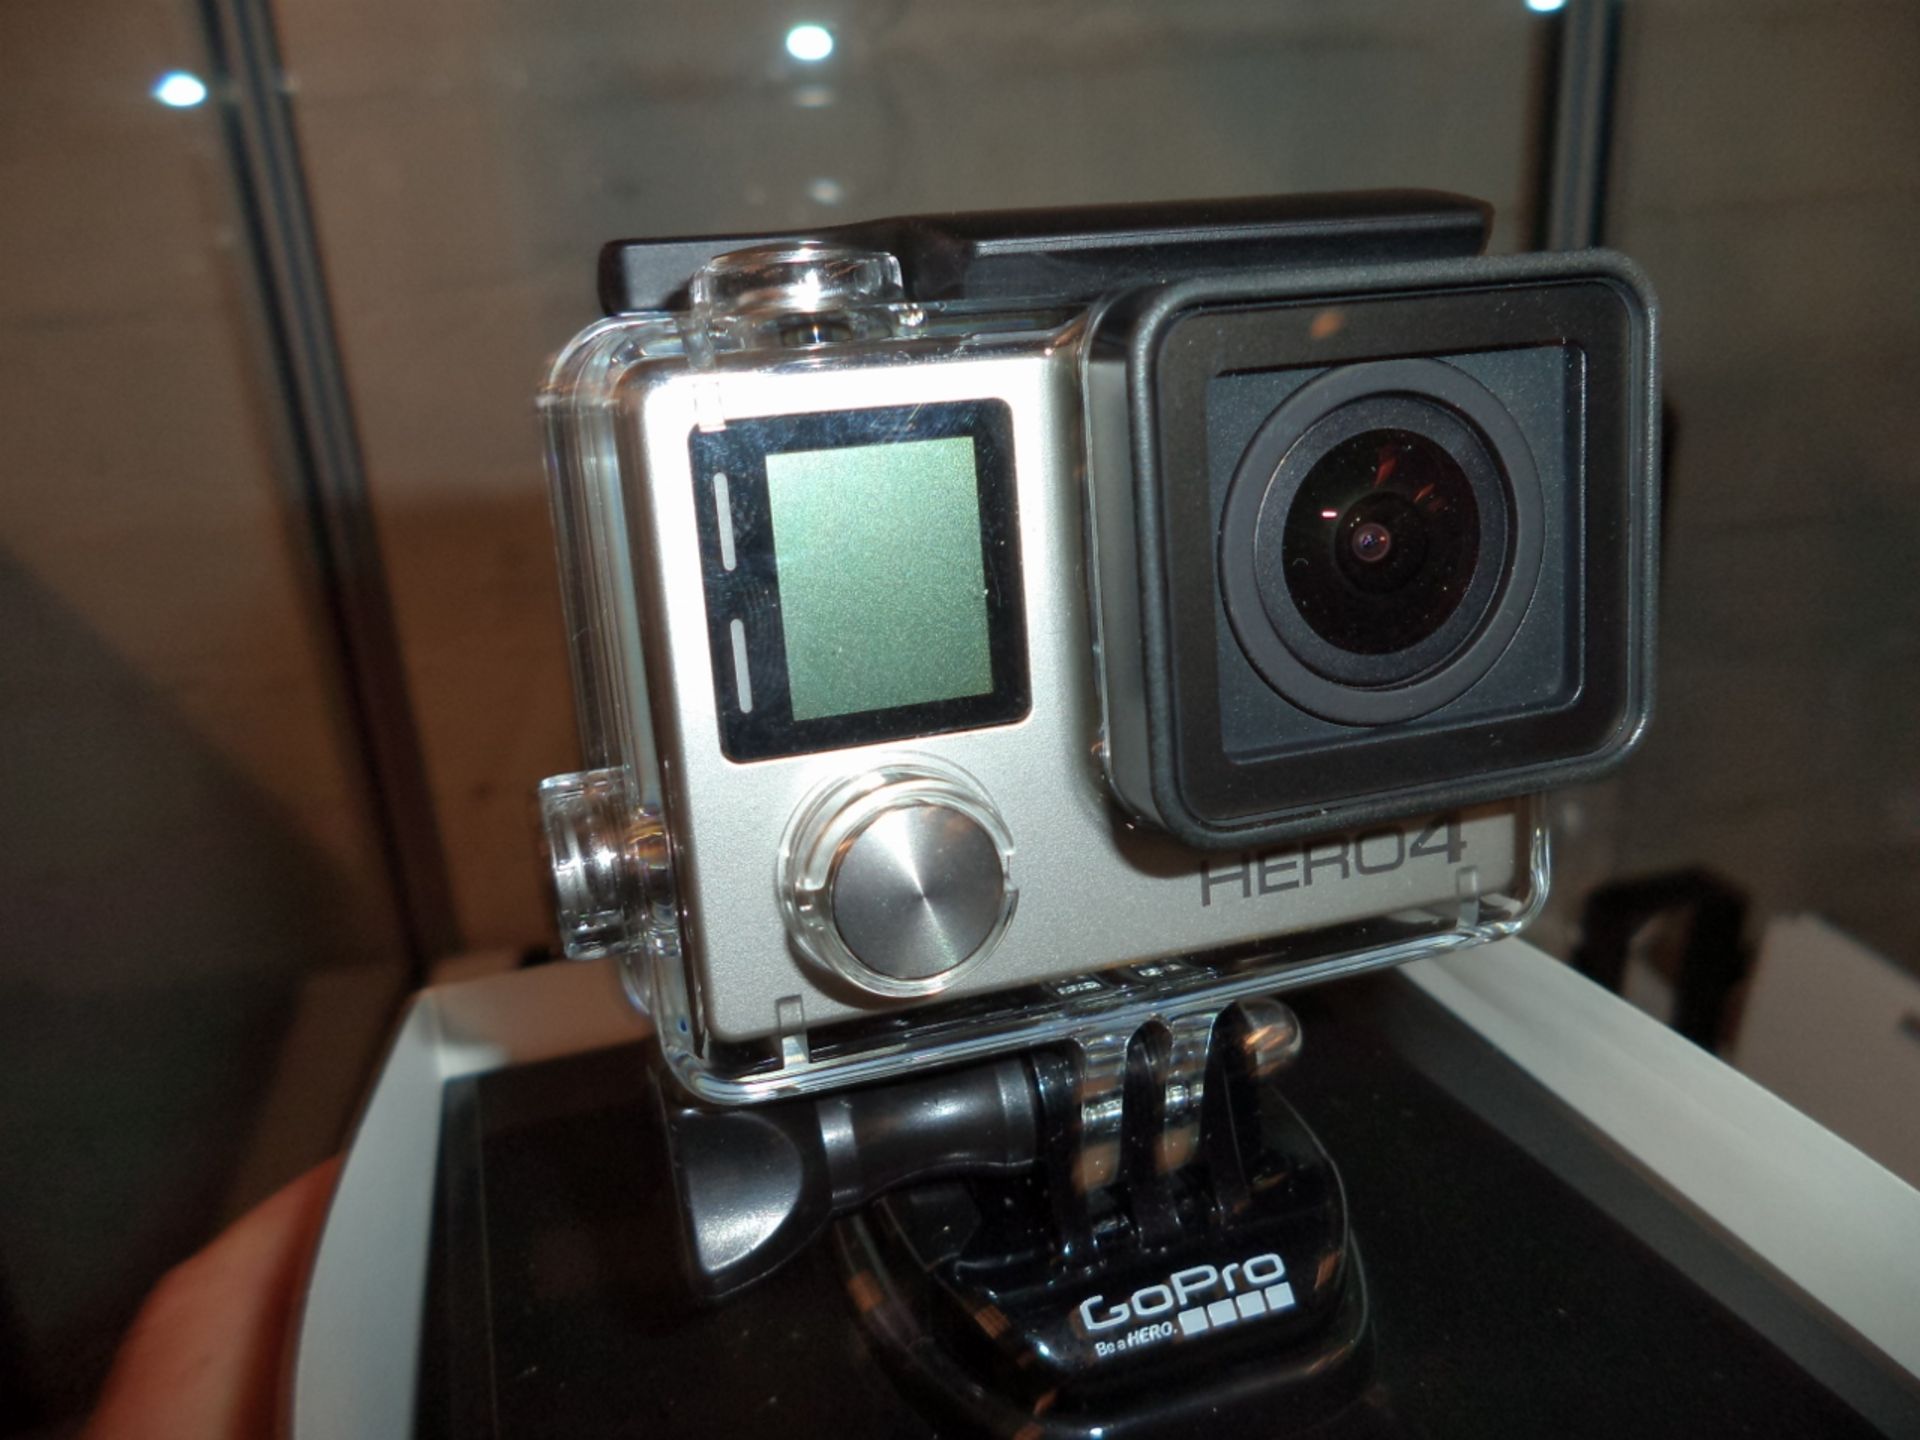 GoPro HERO4 Silver edition action video camera with built-in touchscreen display, box, manuals and - Image 7 of 11